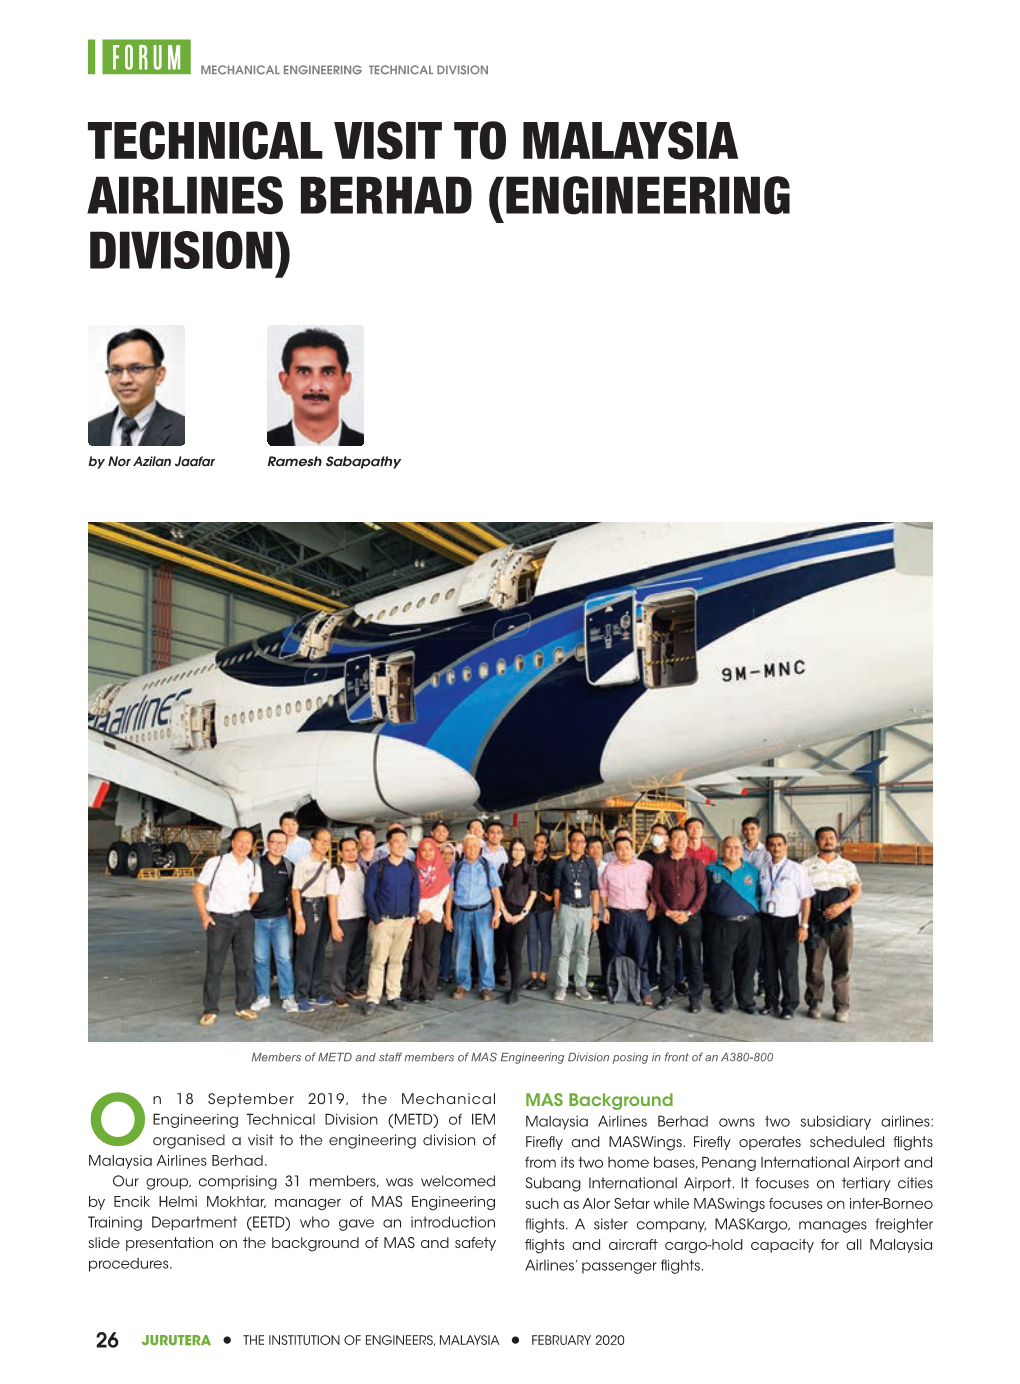 Technical Visit to Malaysia Airlines Berhad (Engineering Division)